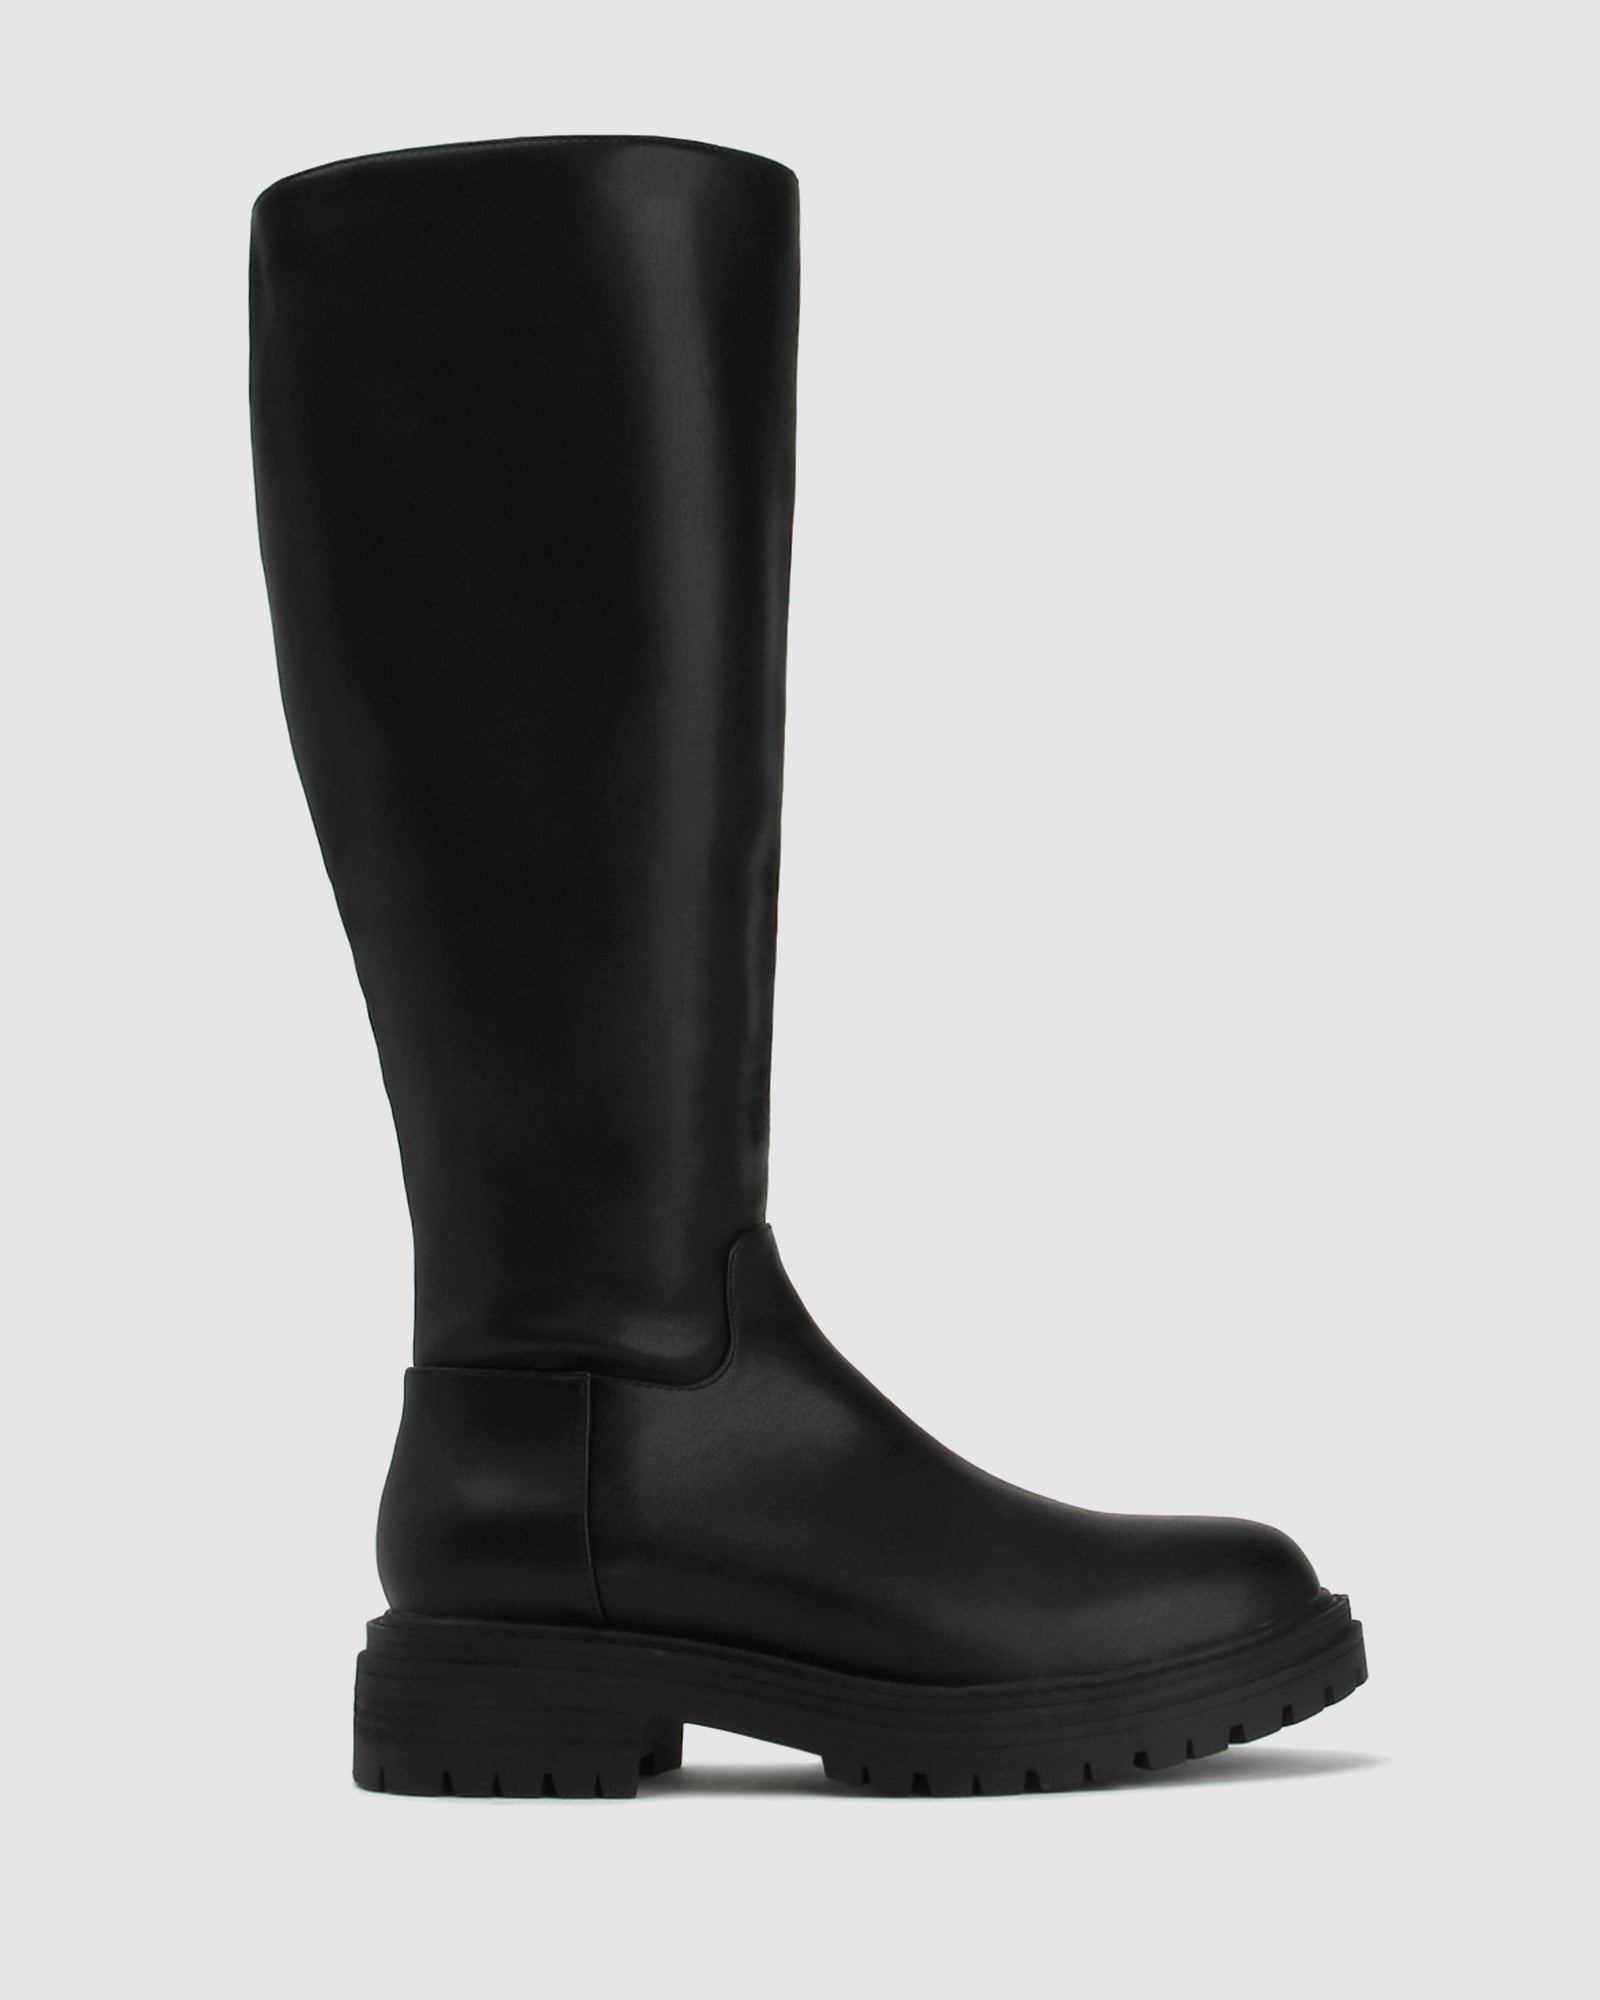 Buy DRAGON Round Toe Knee Boots by Betts online - Betts